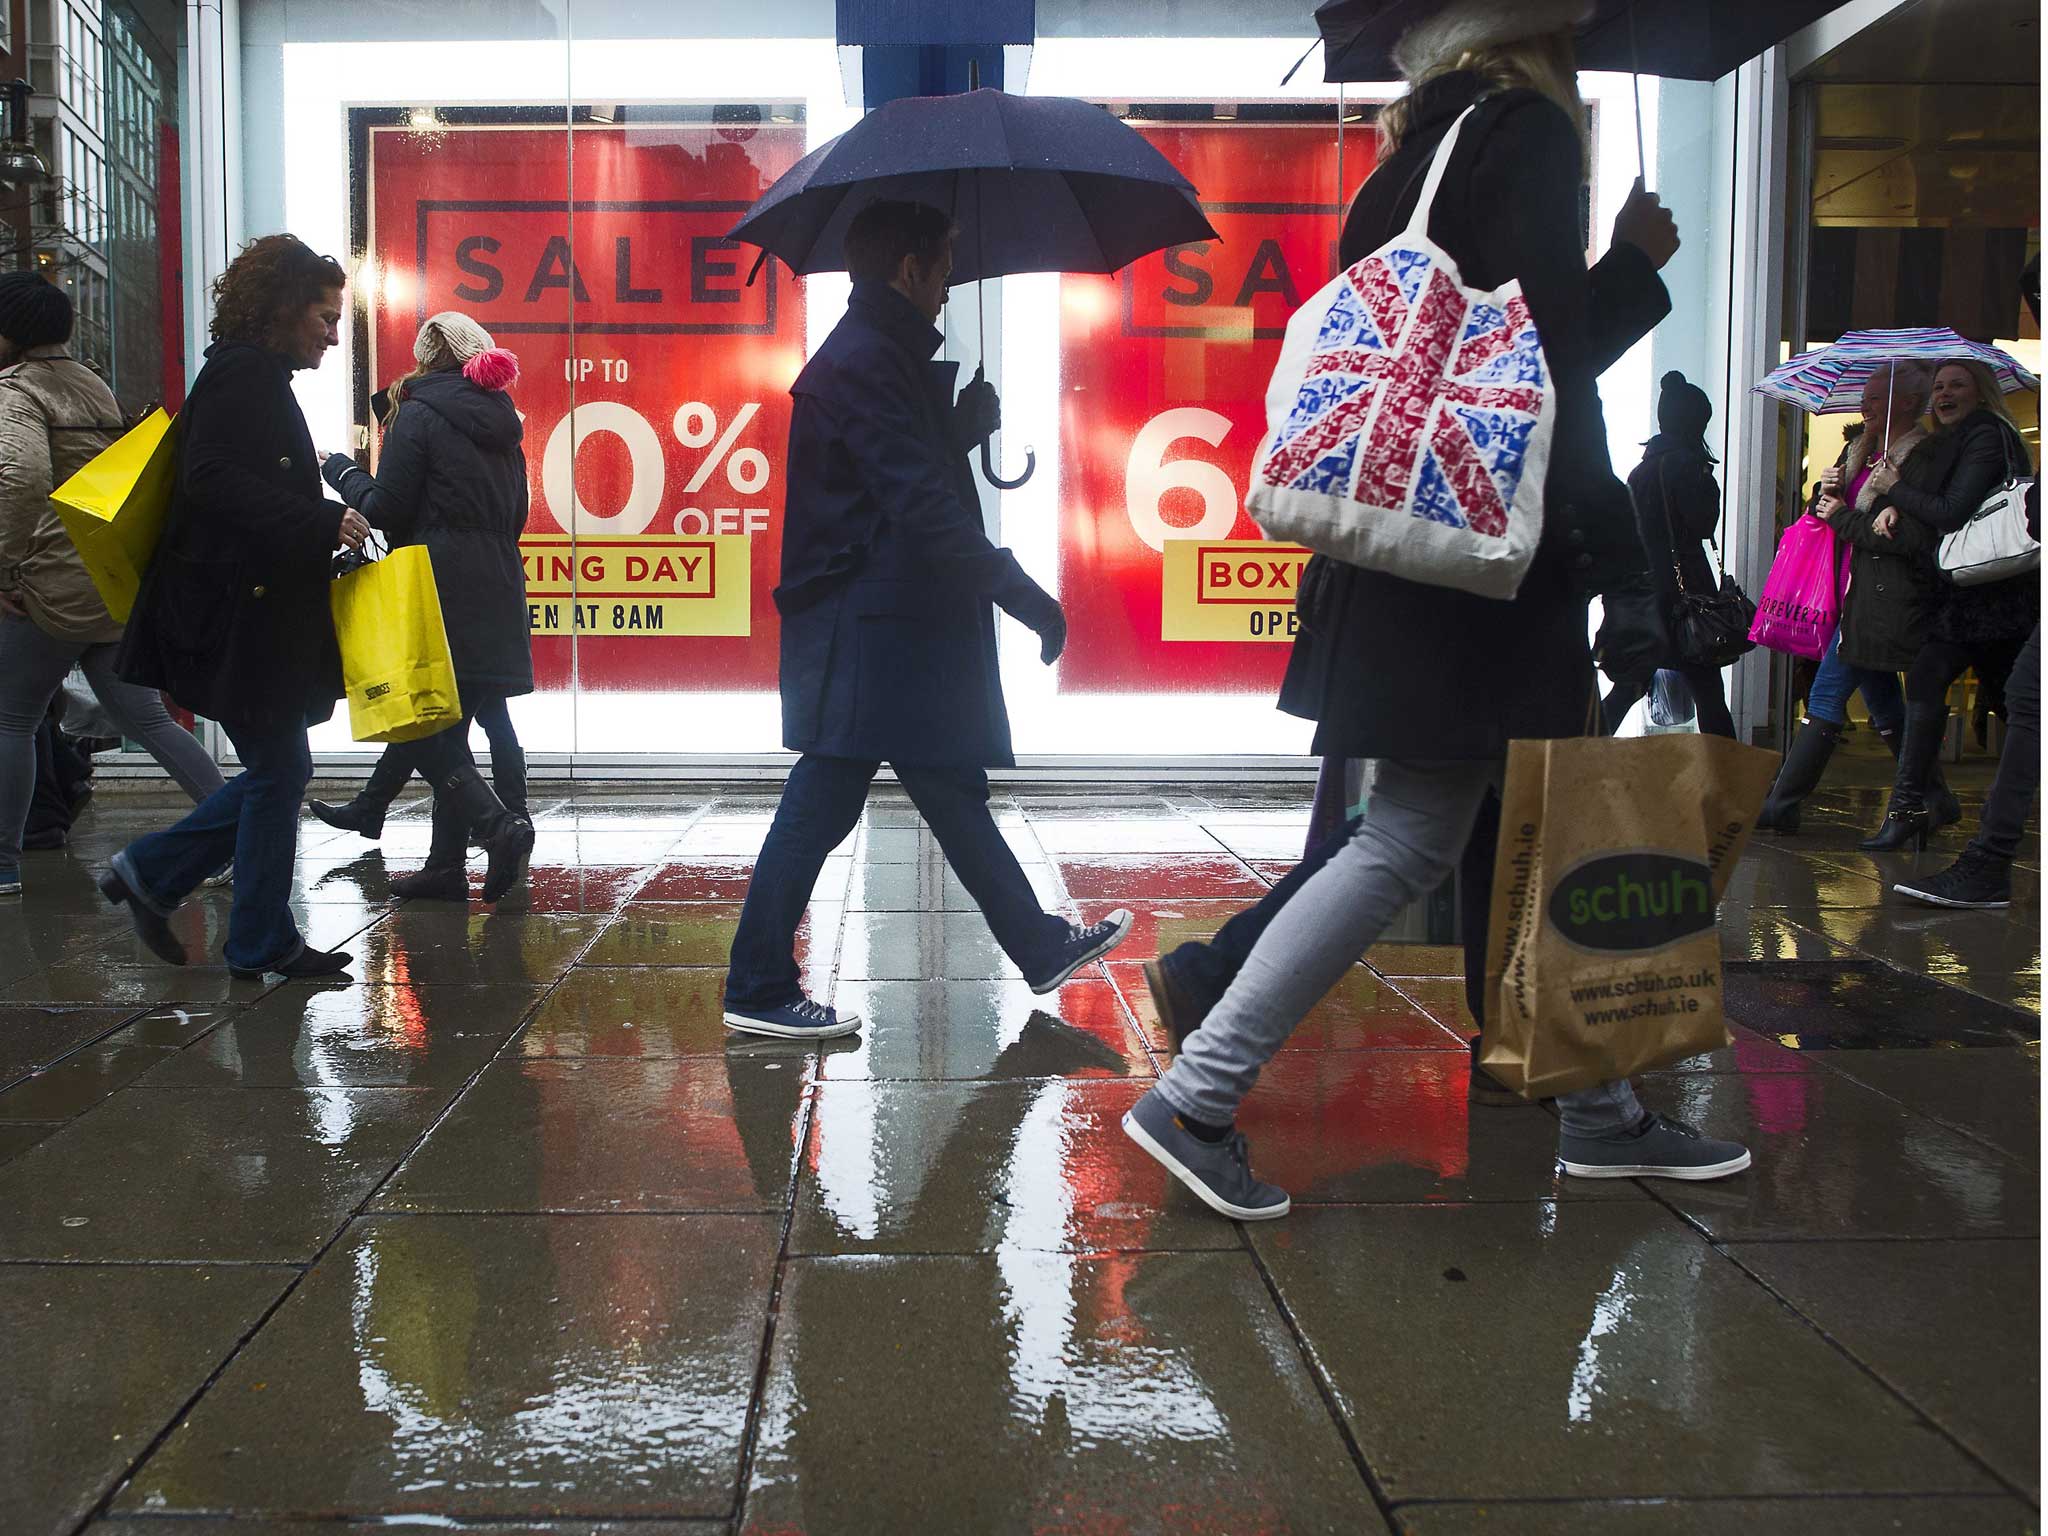 Retail sales are considerable up from last year